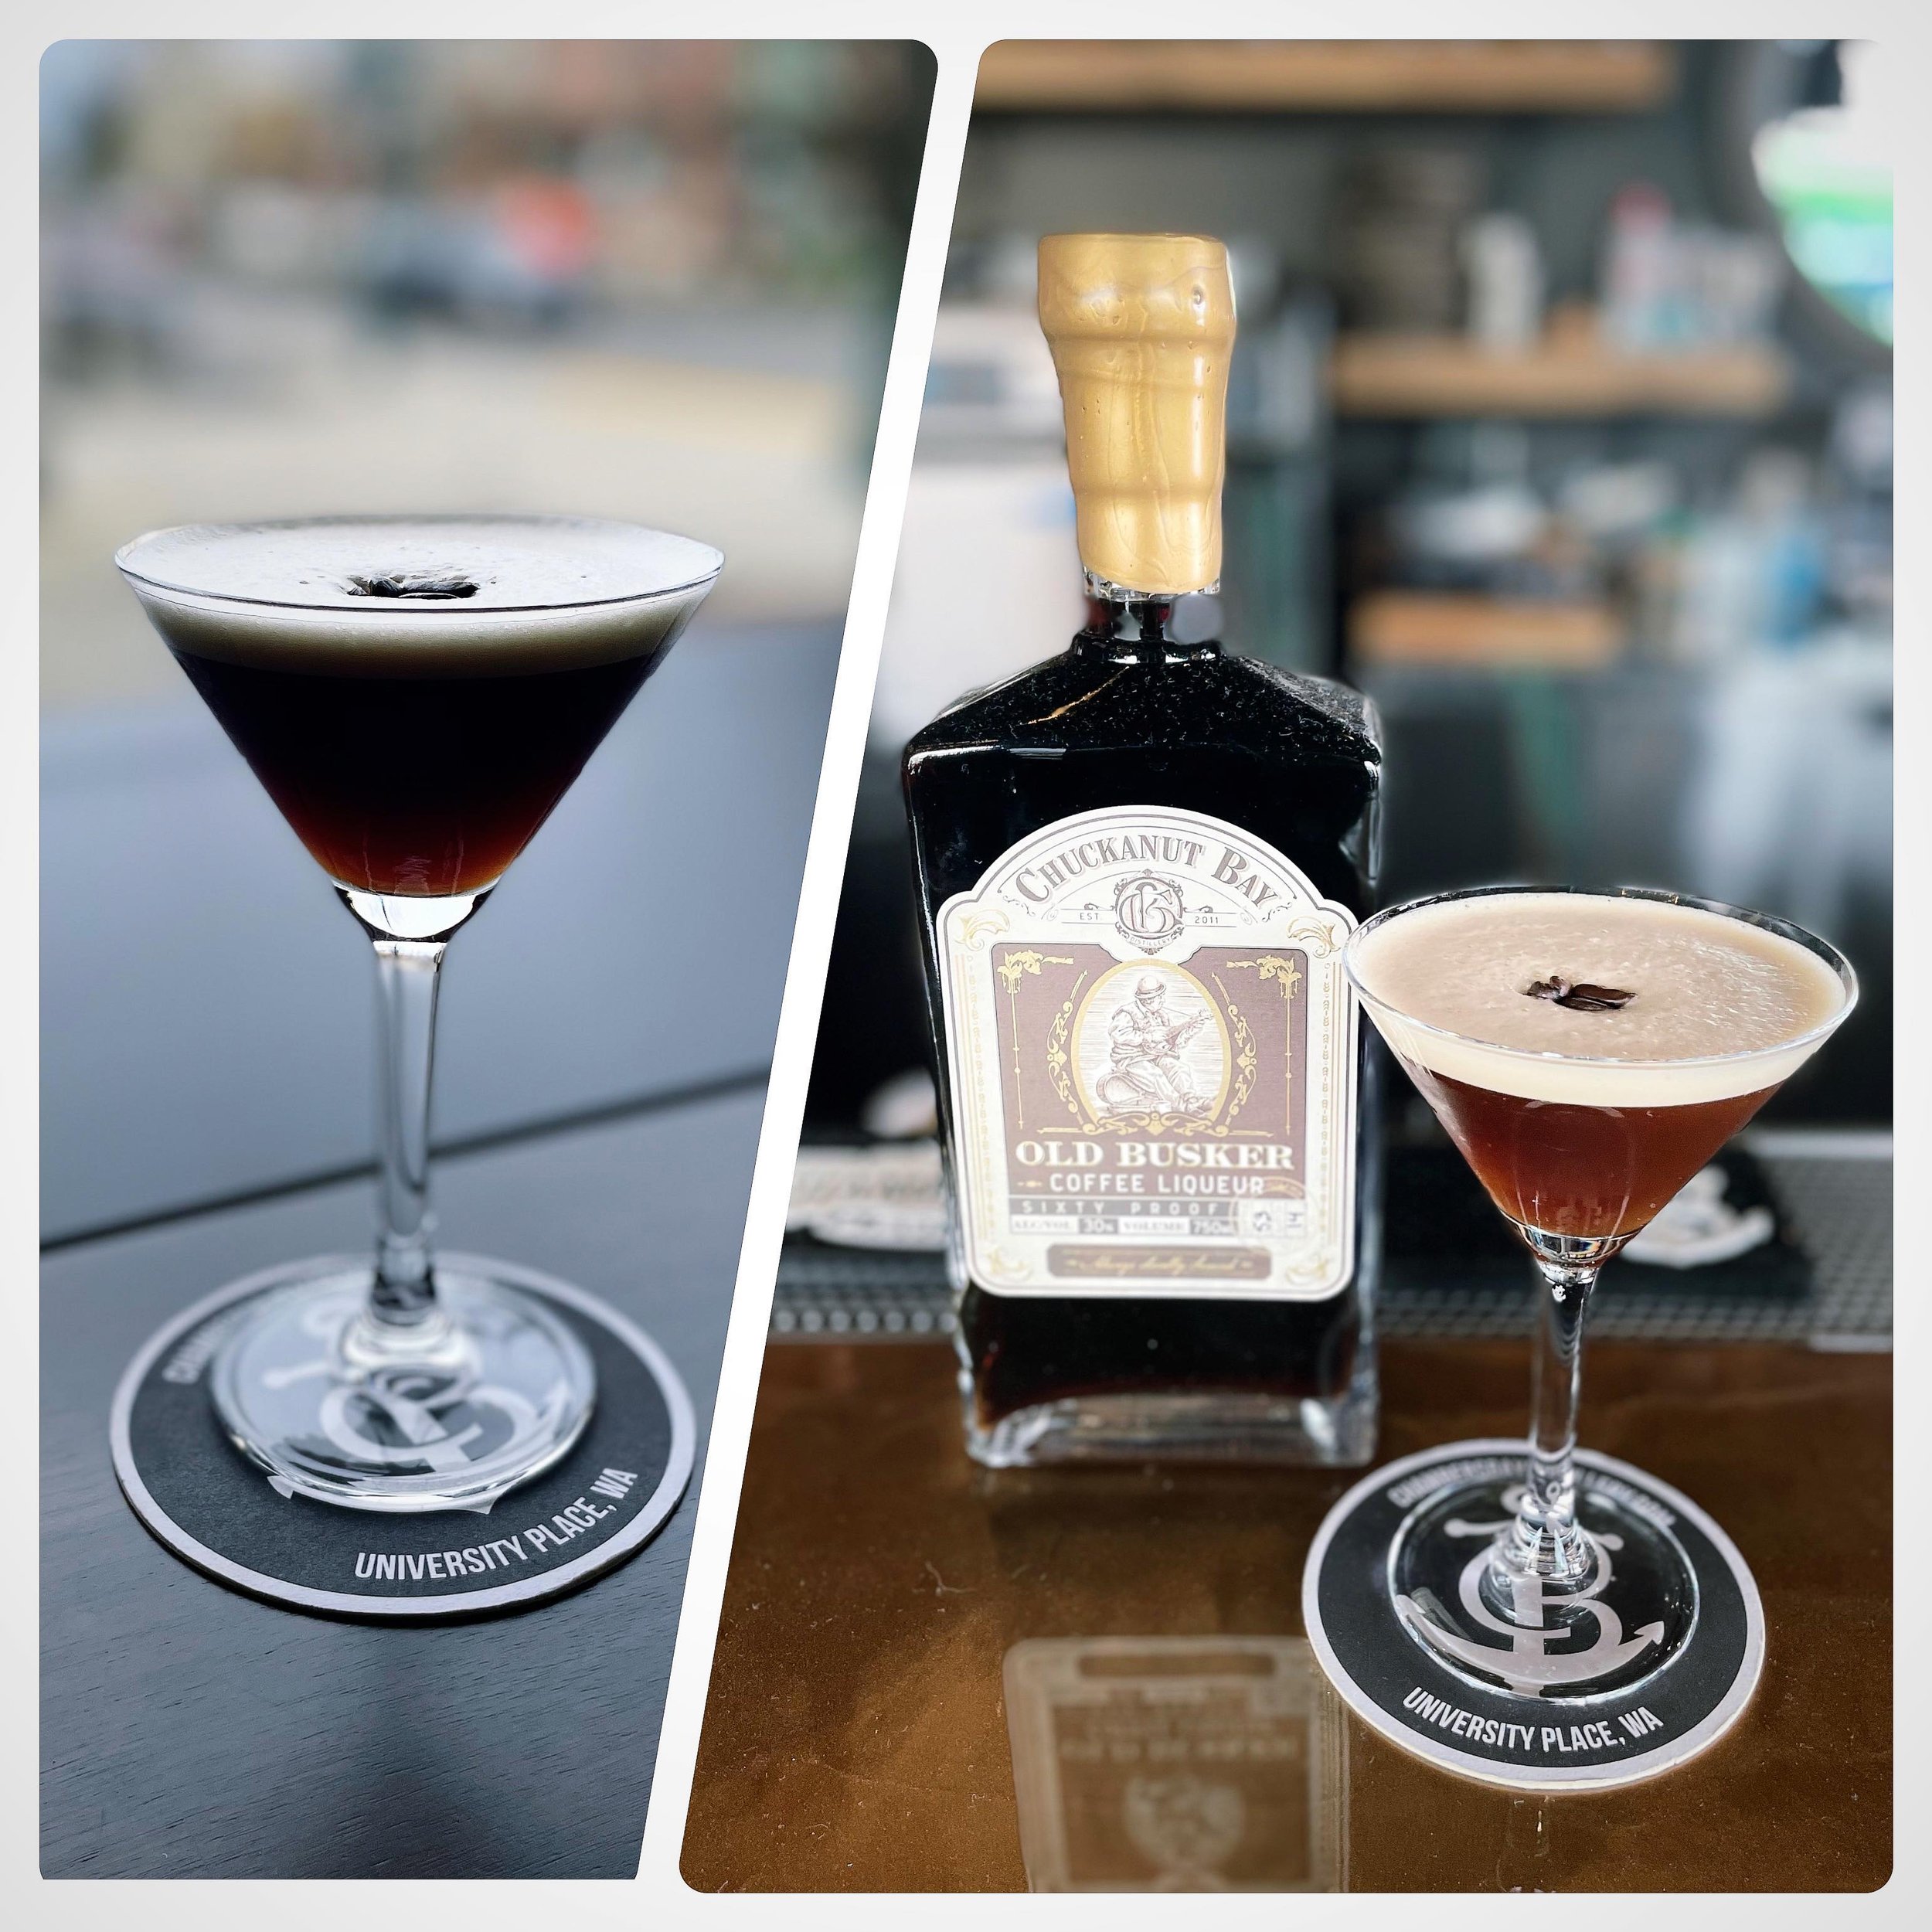 The Chambers Bay Espresso Martini - featuring our R&aacute;n Vodka, espresso, and Old Busker coffee liqueur from @chuckanutbaydistillery . The touch of @sanjuanislandseasalt in our vodka heightens all the flavors in this cocktail - from the french es